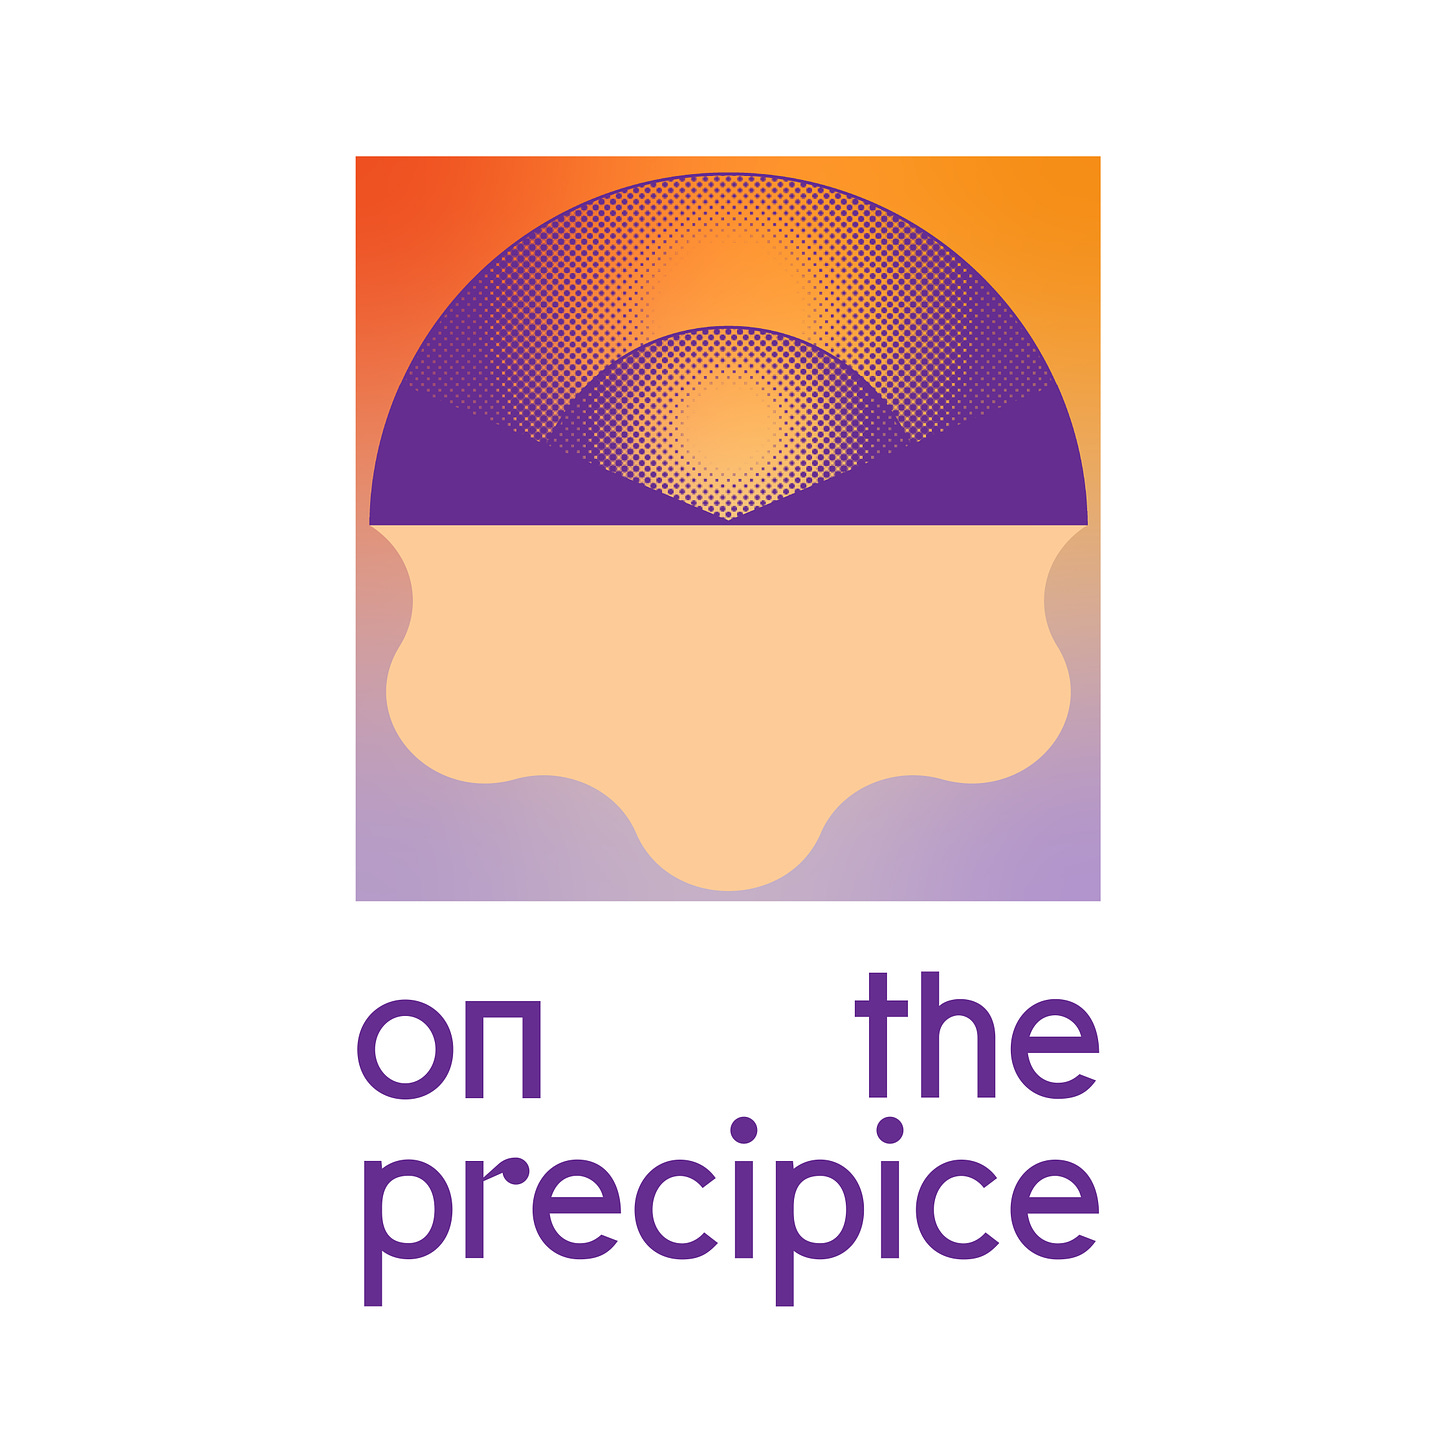 Logo designed by Nadine Nakanishi. An orange-to-purple gradient image that resembles a fluid orb-like structure it might resemble a jellyfish without the tentacles or a lamp, or both. The top half is purple with peeks of orange; the bottom half is a more muted orange/yellow. Below this image are the words “on the precipice” in purple. 